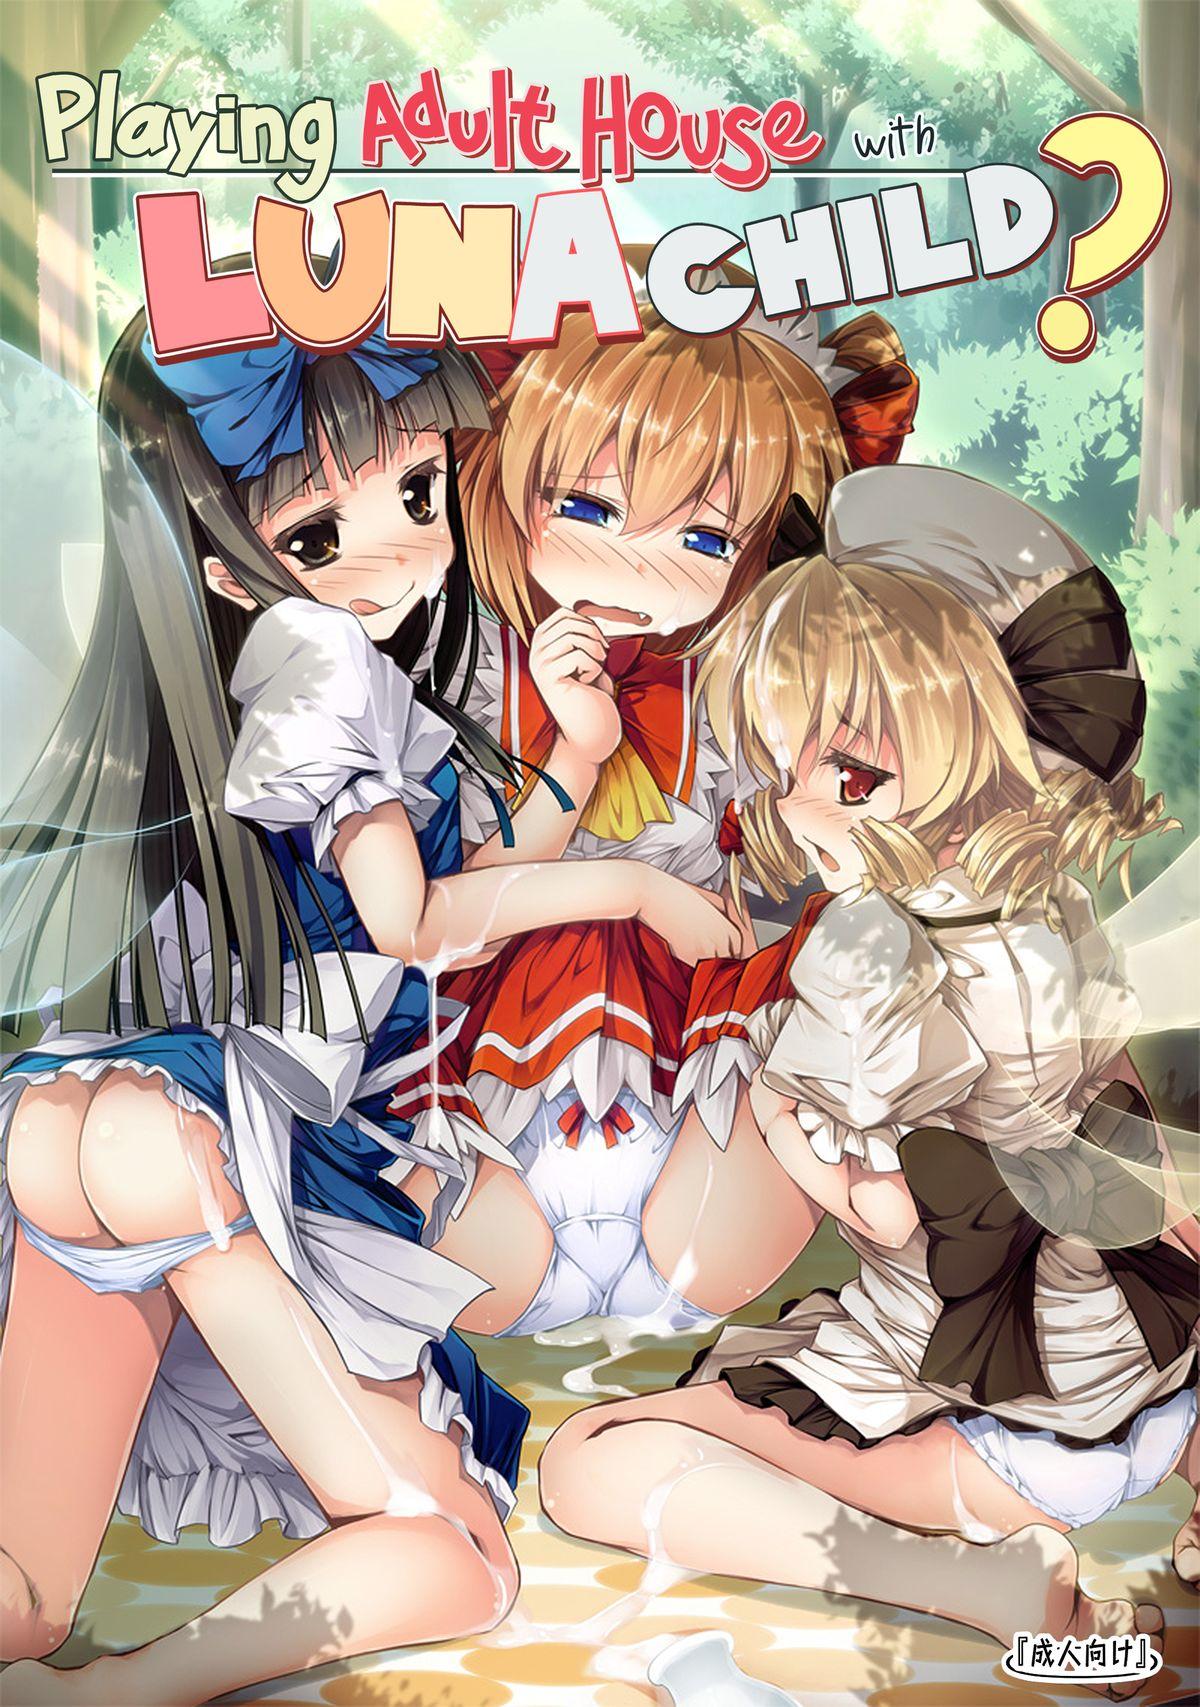 Perfect Girl Porn Luna-cha to Otona no Omamagoto? | Playing Adult House with Luna Child? - Touhou project Cuckolding - Page 1